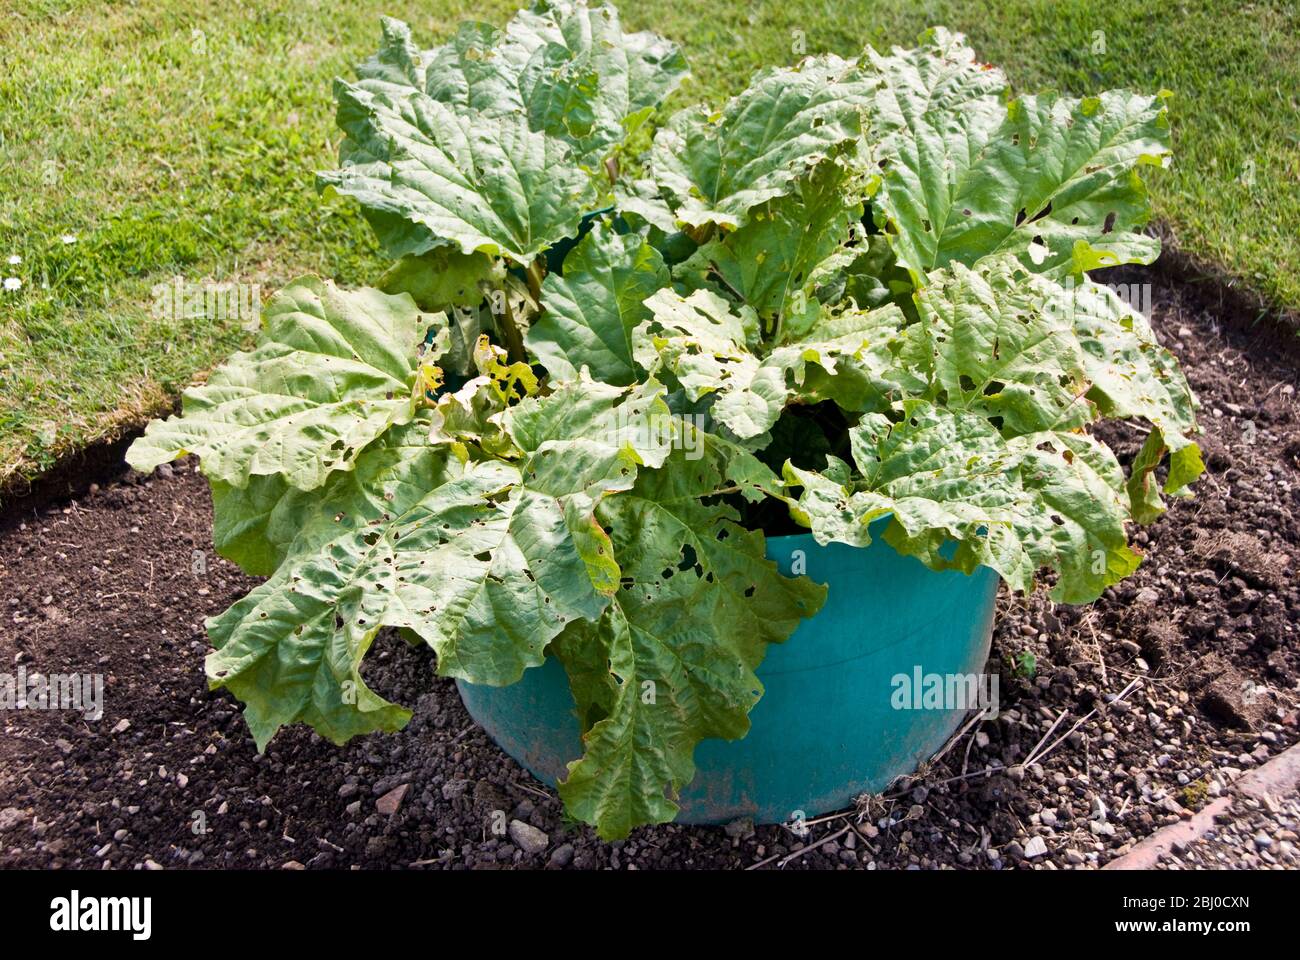 Rhubarb being grown with 'collars' to keep the stems paler and give them some protection - Stock Photo